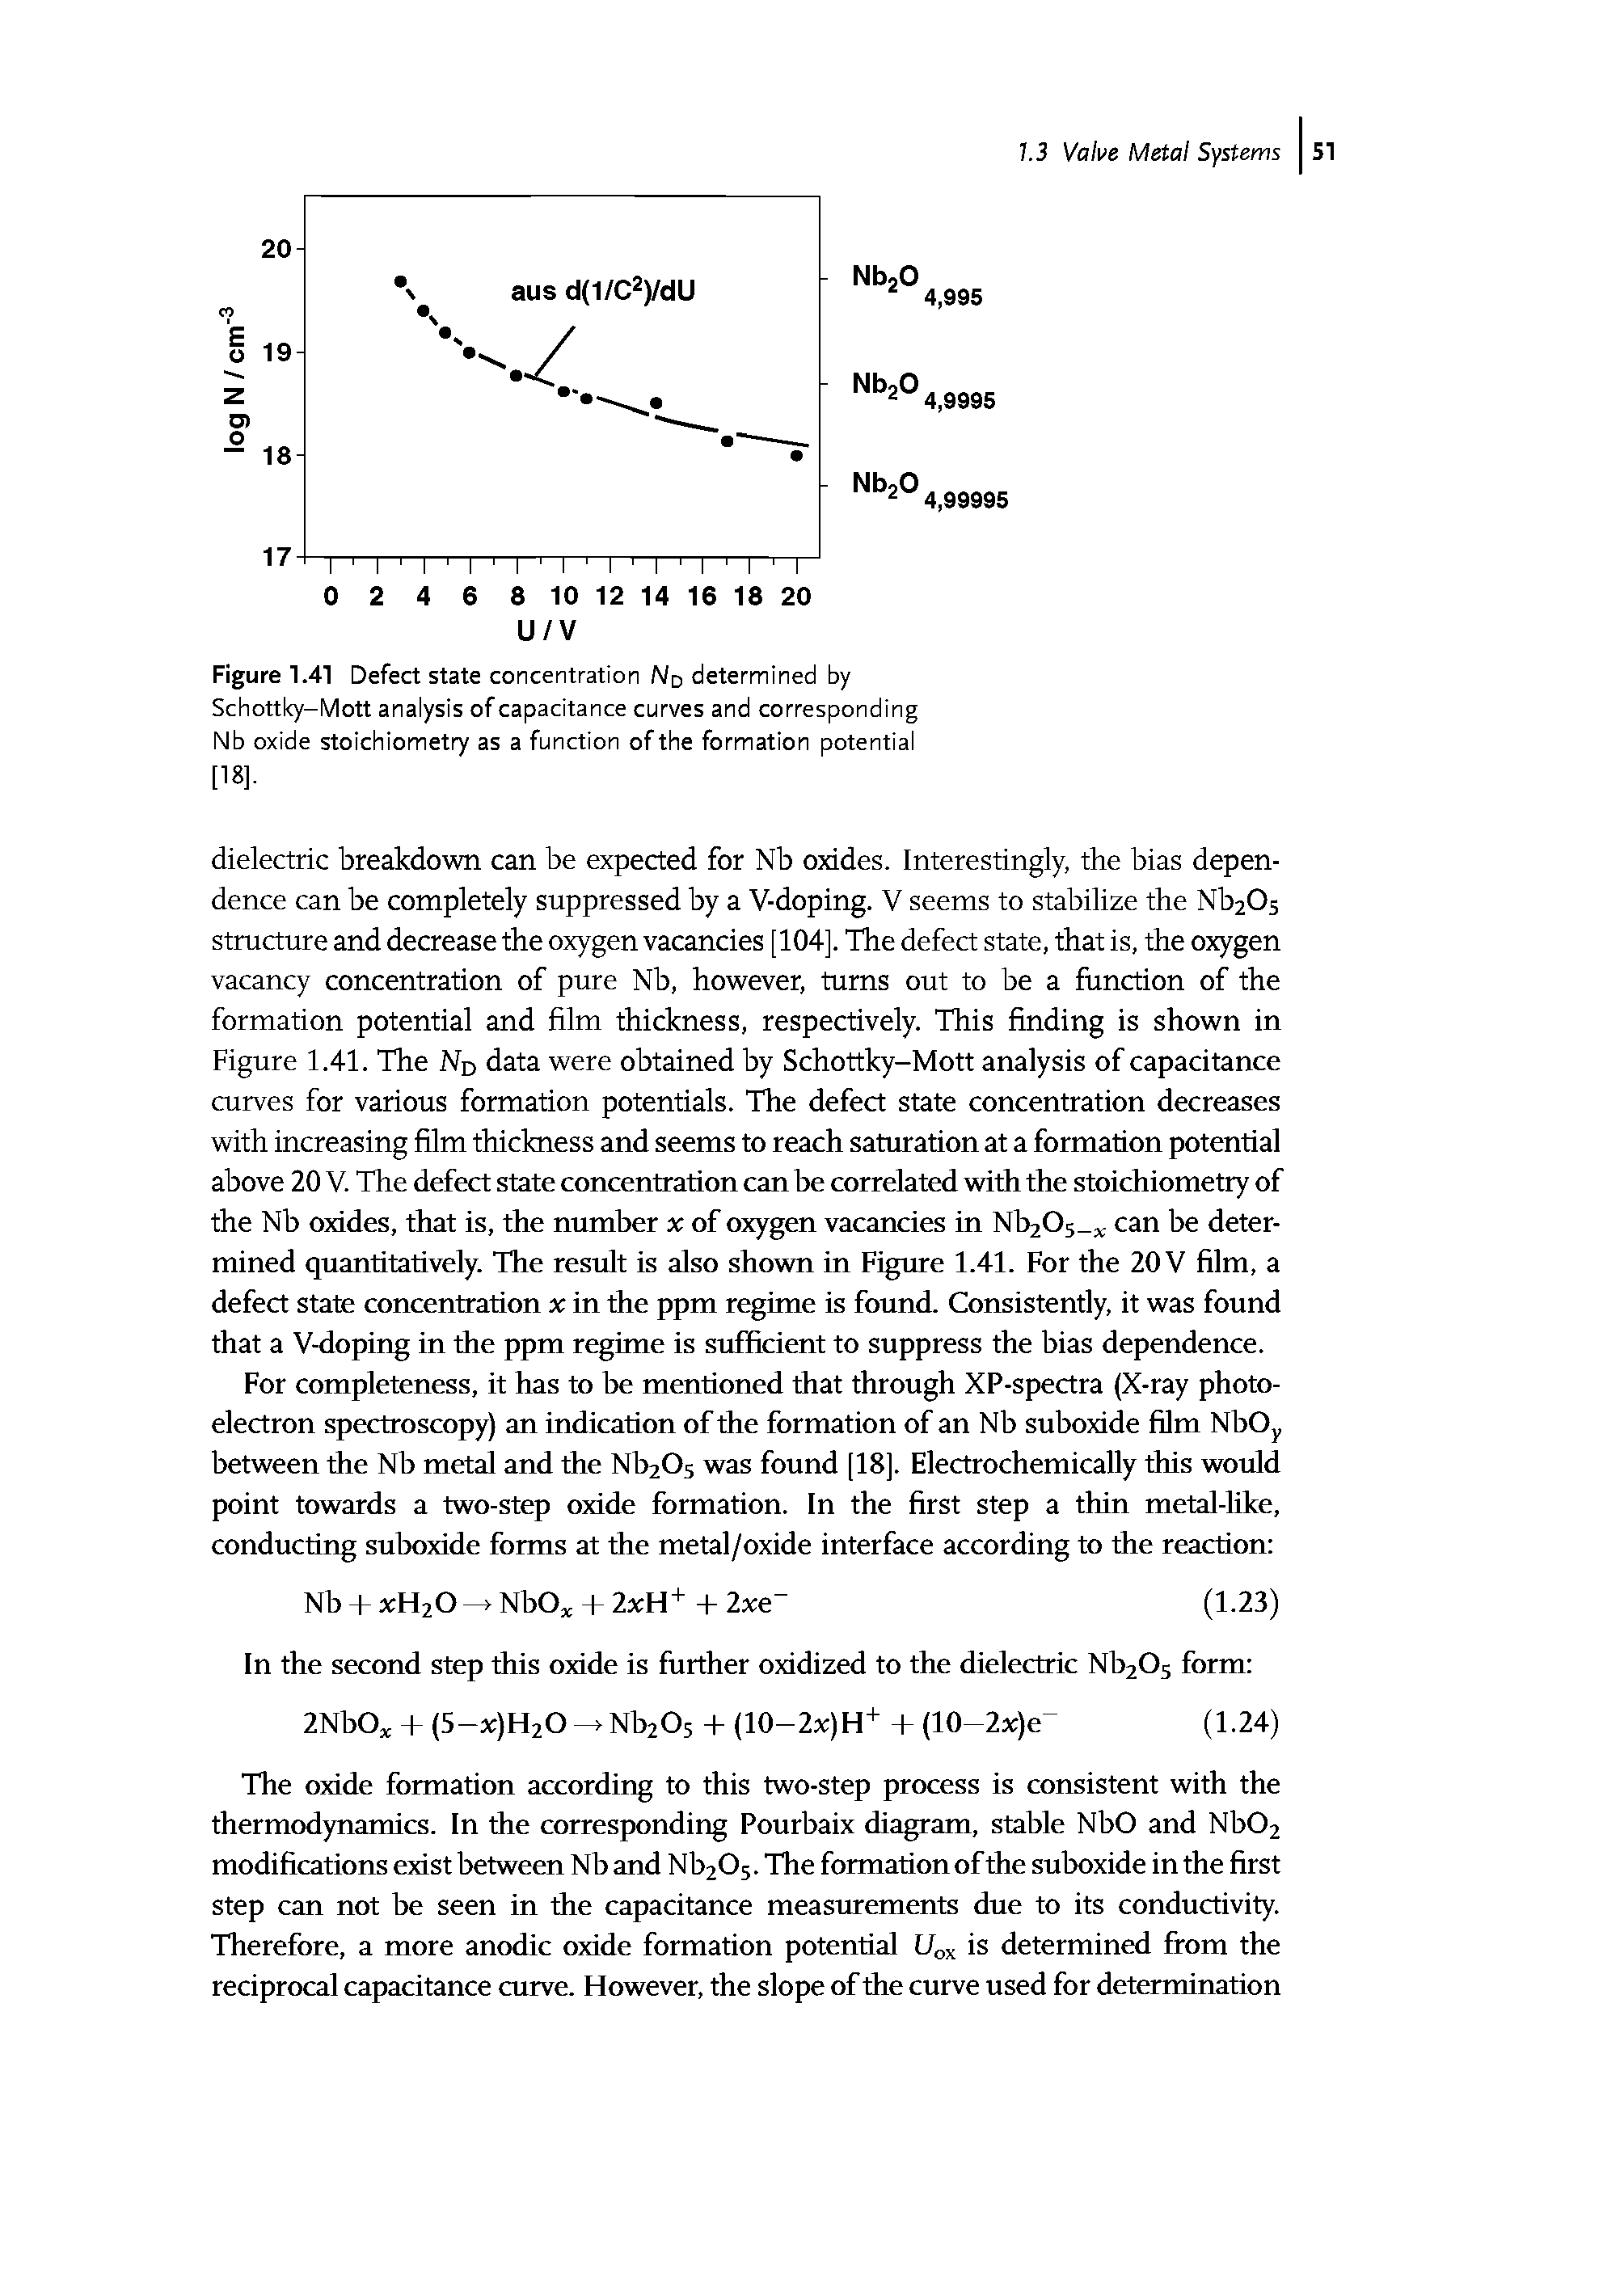 Figure 1.41 Defect state concentration No determined by Schottky-Mott analysis of capacitance curves and corresponding Nb oxide stoichiometry as a function of the formation potential...